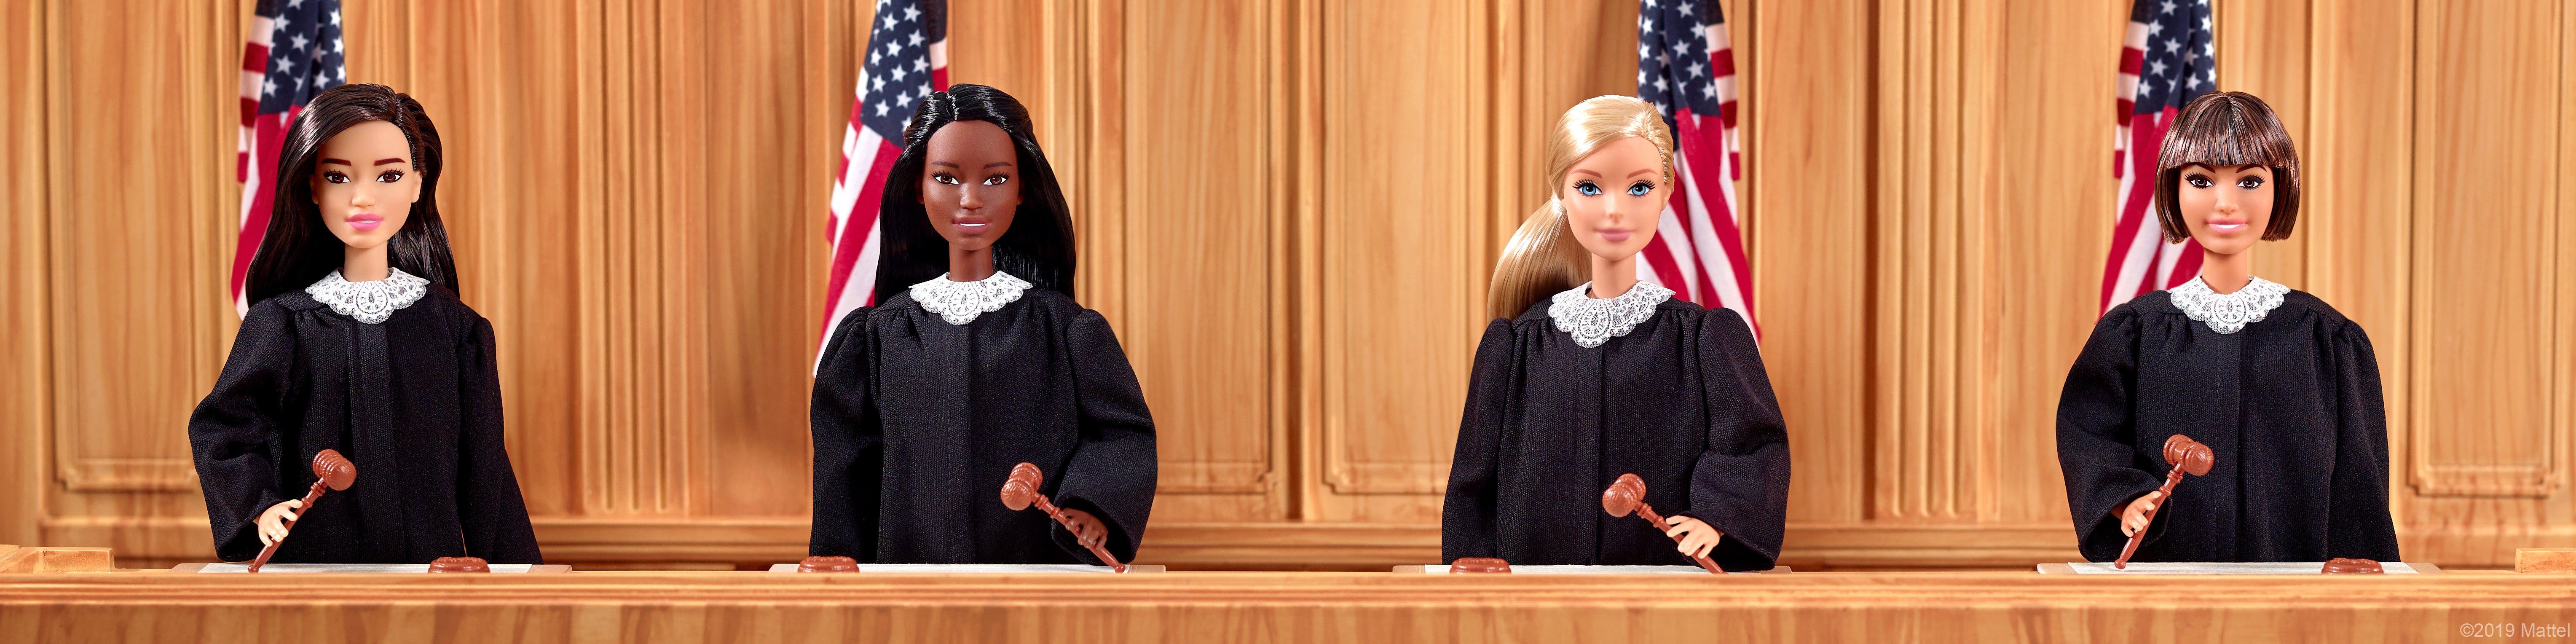 Barbie Takes On New Career As Judge